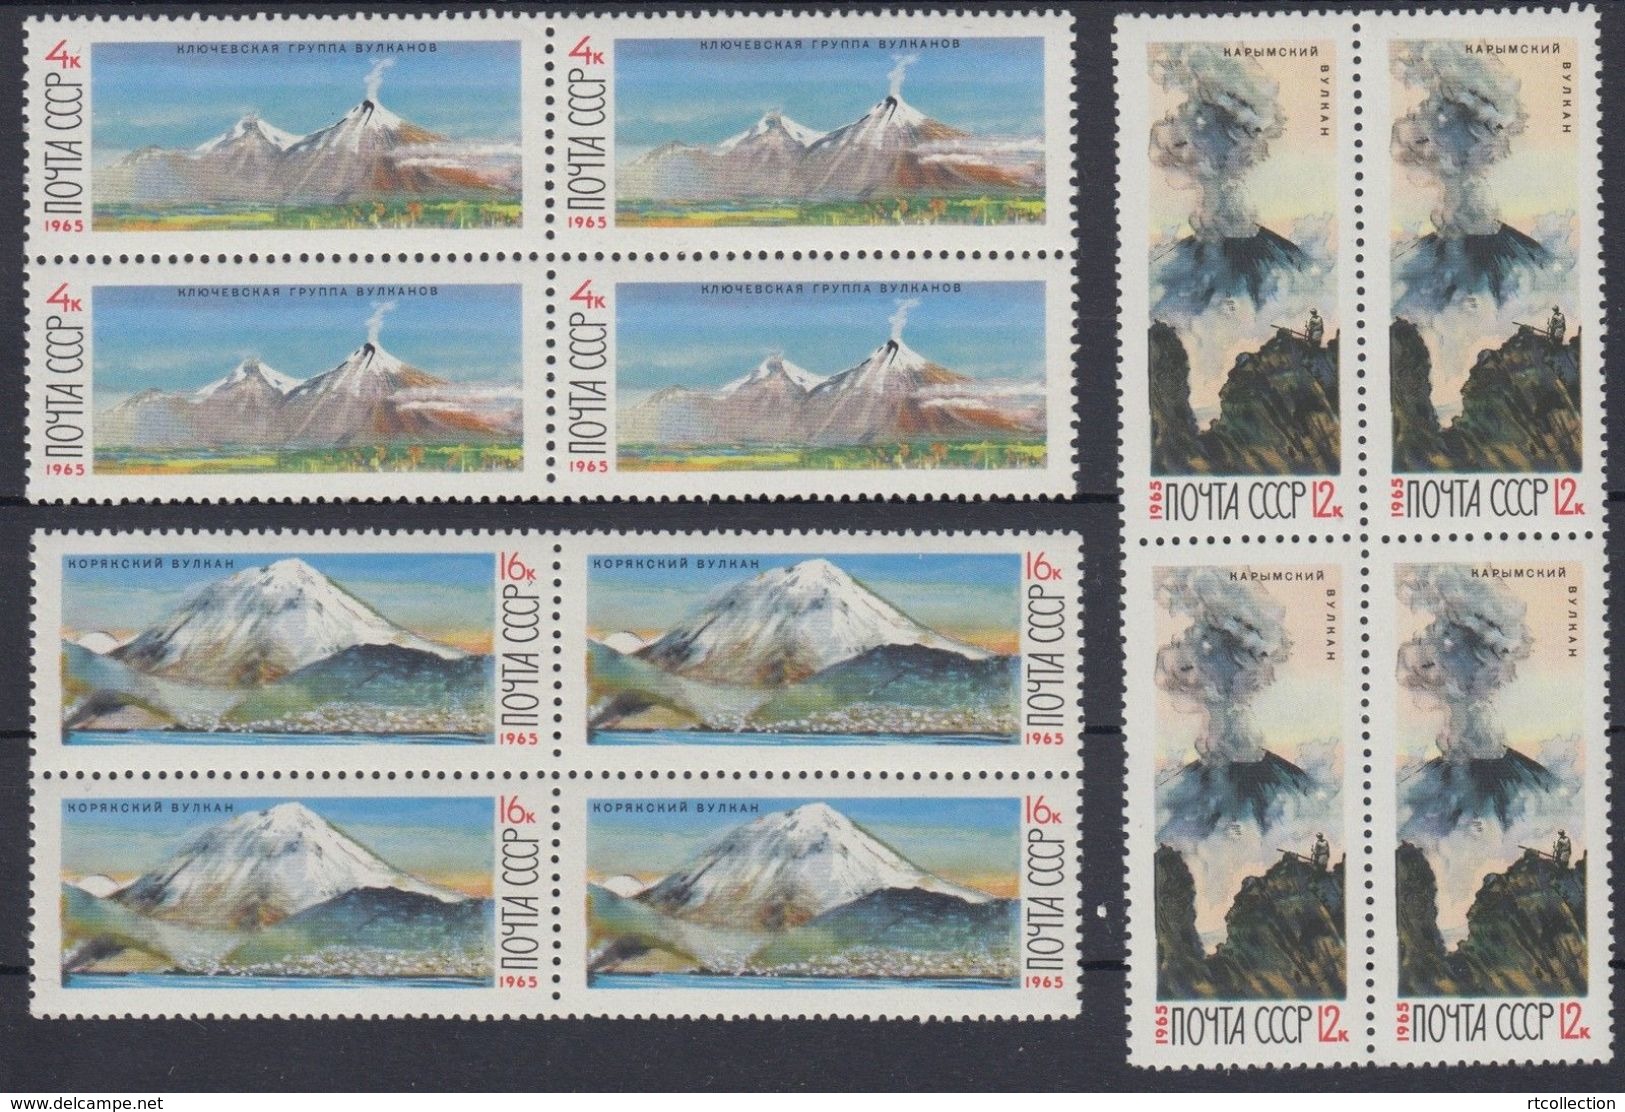 USSR Russia 1965 Block Volcanos Kamchatka Nature Kluchevsky Volcano Geology Geography Places Stamps MNH Mi 3138-3140 - Volcanos